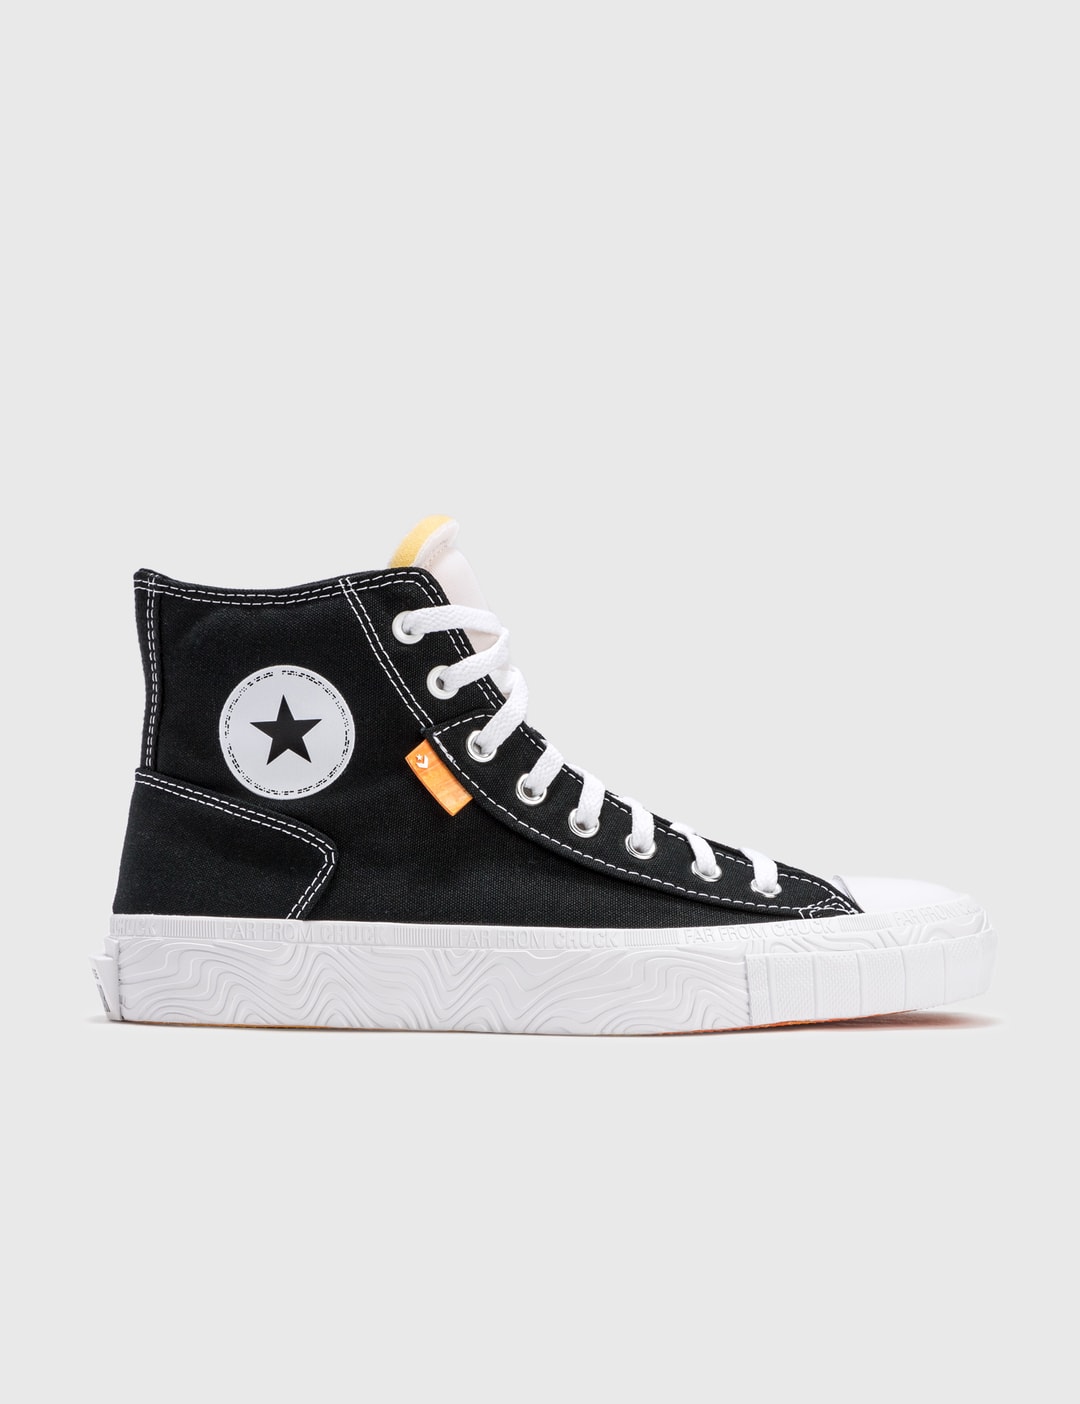 politicus Antipoison Giraffe Converse - Alt Exploration Chuck Taylor All Star | HBX - Globally Curated  Fashion and Lifestyle by Hypebeast